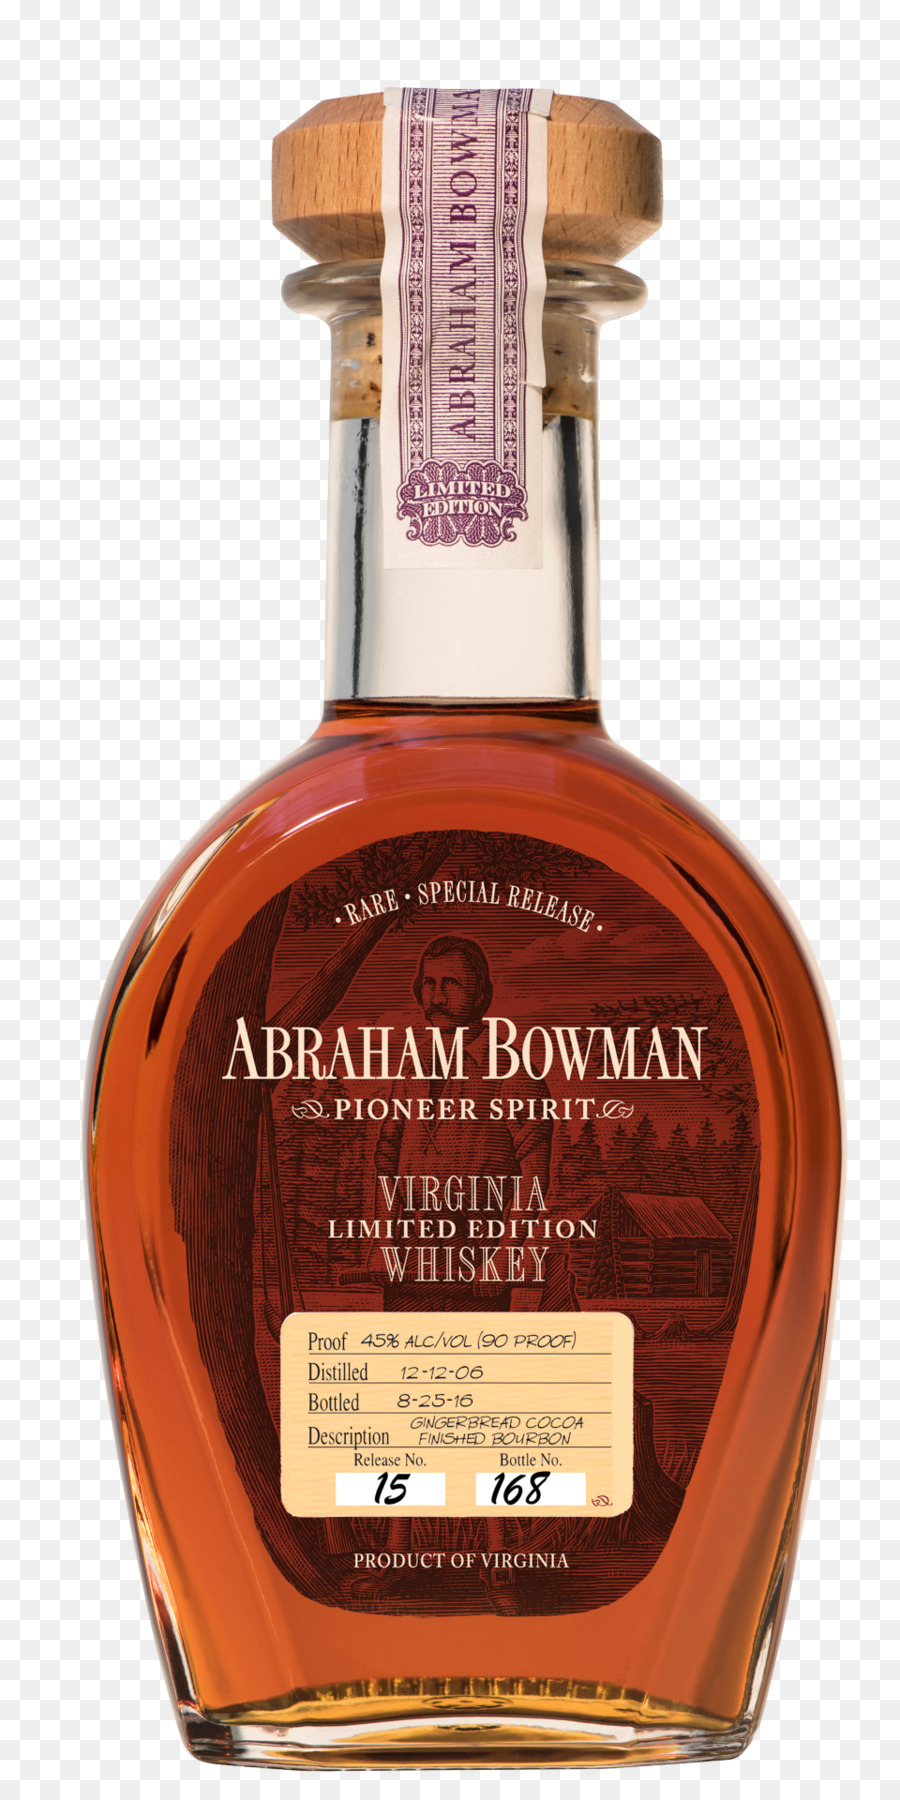 Tennessee whiskey A. Smith Bowman Distilleria di whisky detto 